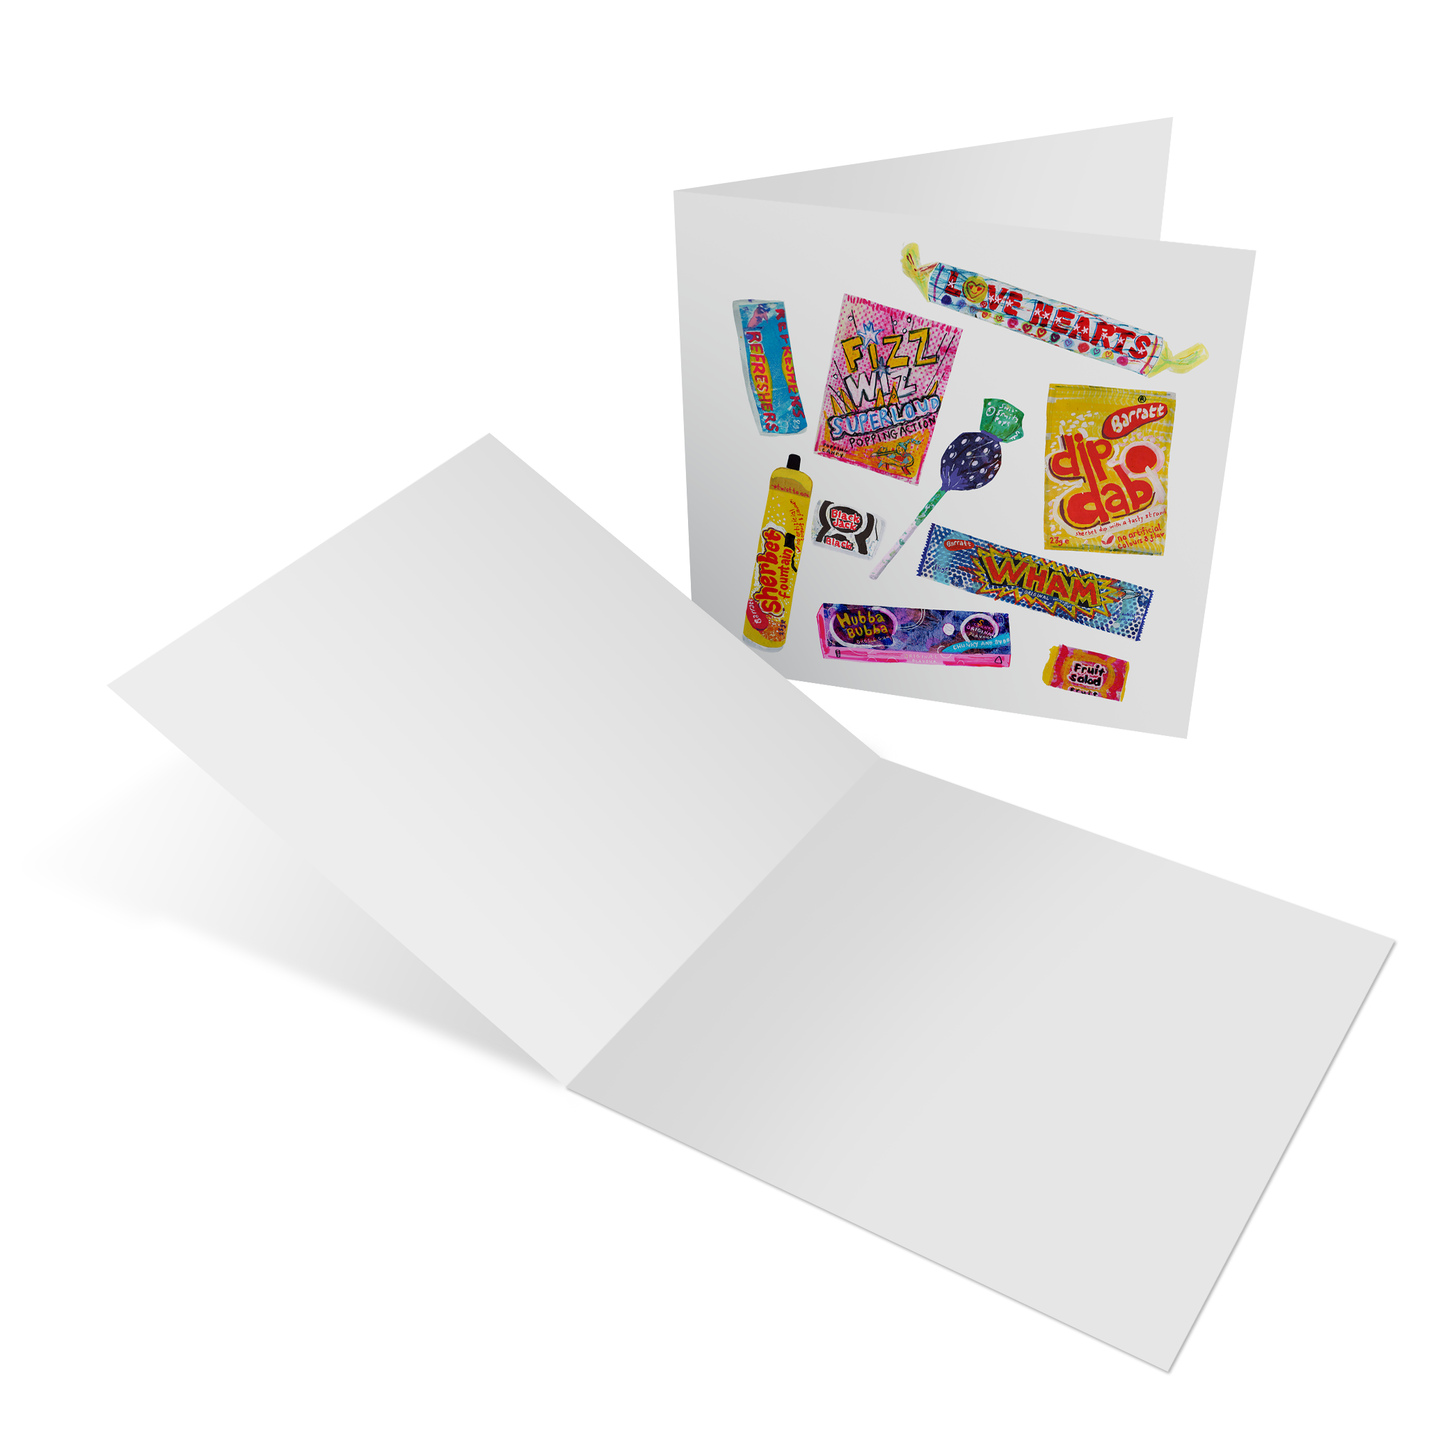 retro sweets collection of four greeting cards